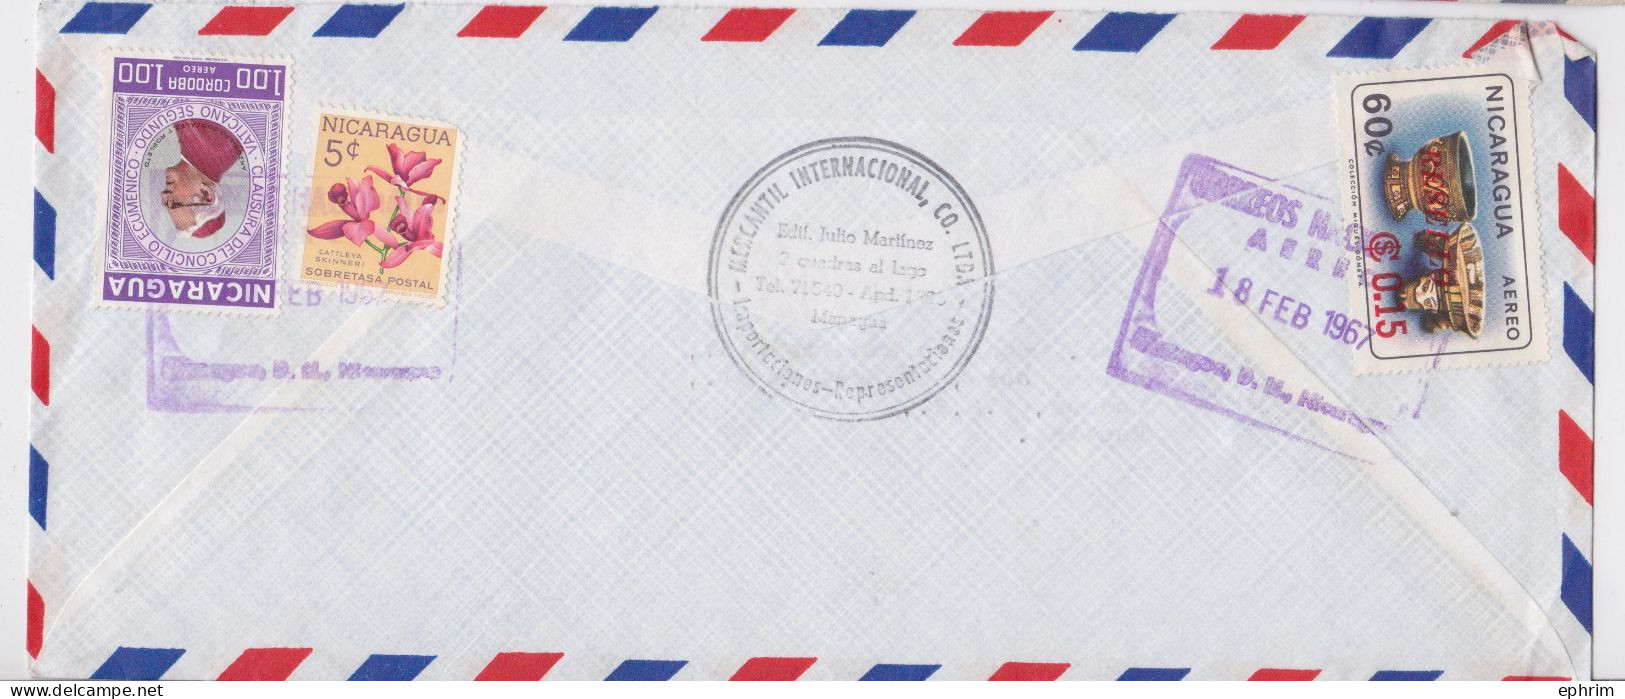 Nicaragua Lettre Timbre Vatican Orchidée Poterie Archéologie Pottery Stamp  Air Mail Cover Sello Correo Aereo 1967 - Nicaragua